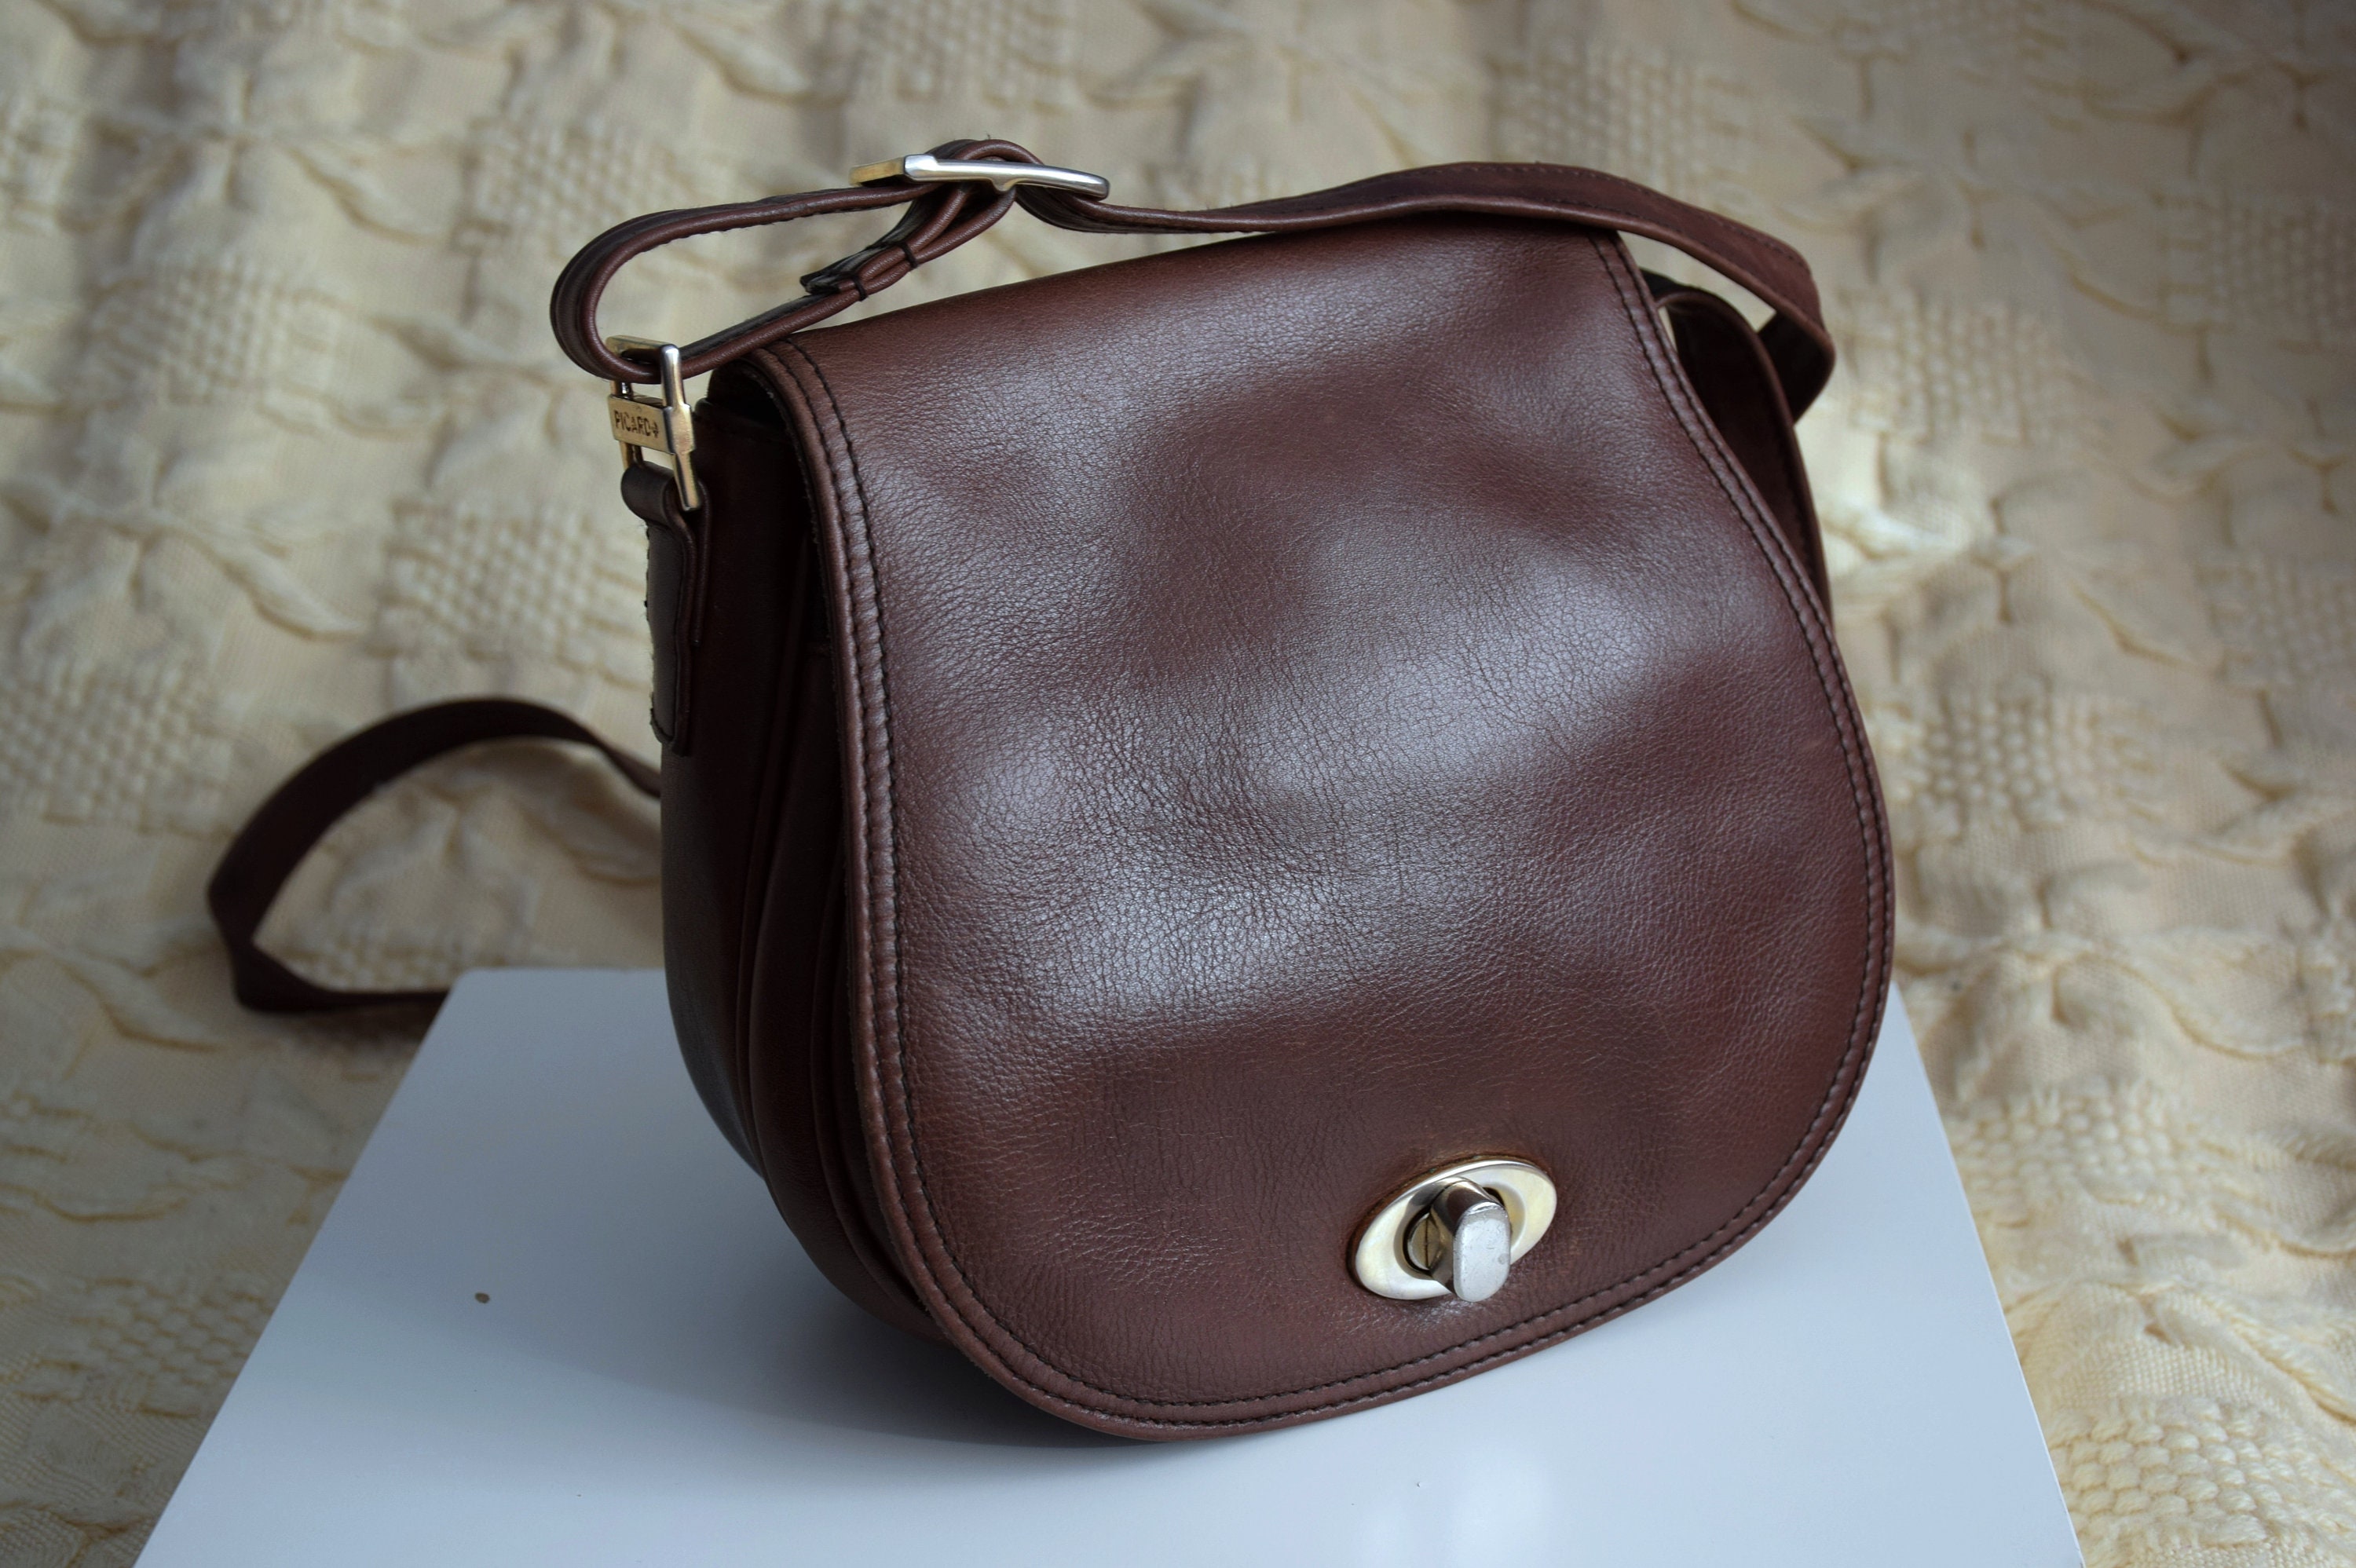 Picard Tan Leather Purse Made in Germany Shoulder Bag - Great Shape